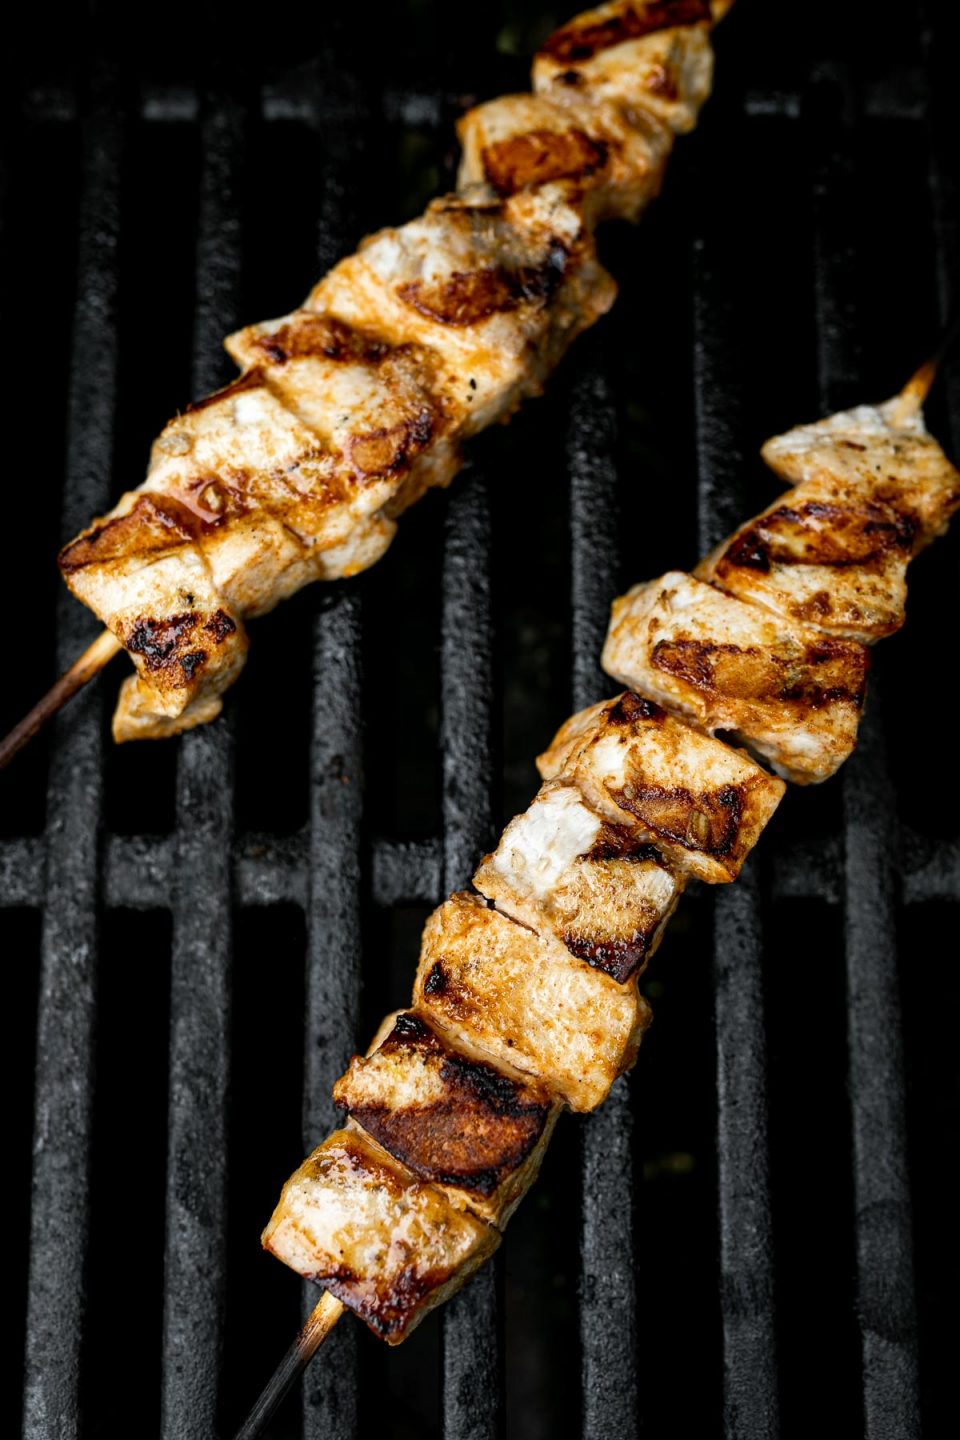 Swordfish kabobs on grill grates, with deep grill marks.